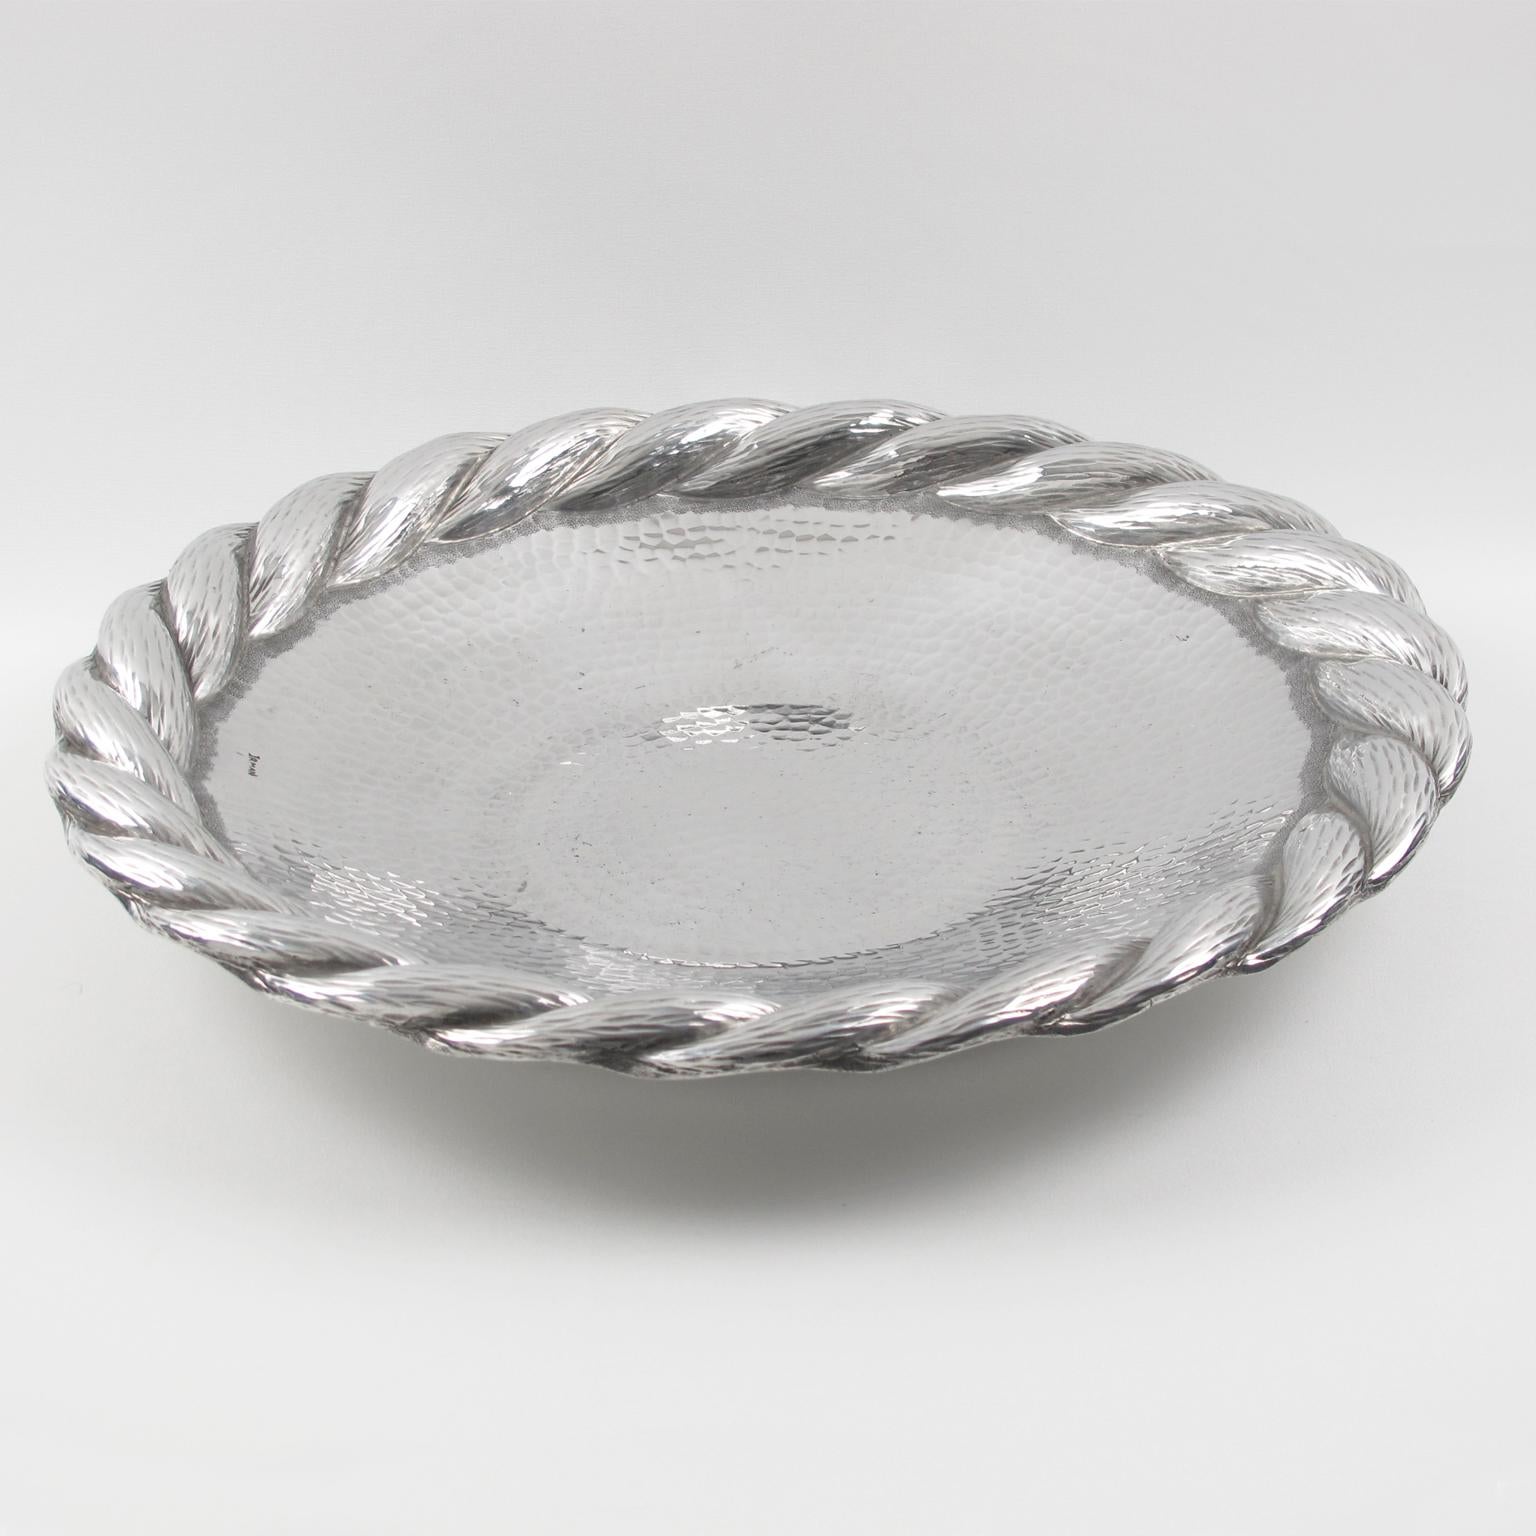 Art Deco Aluminum Platter Centerpiece or Tray by Irman France, 1930s In Excellent Condition For Sale In Atlanta, GA